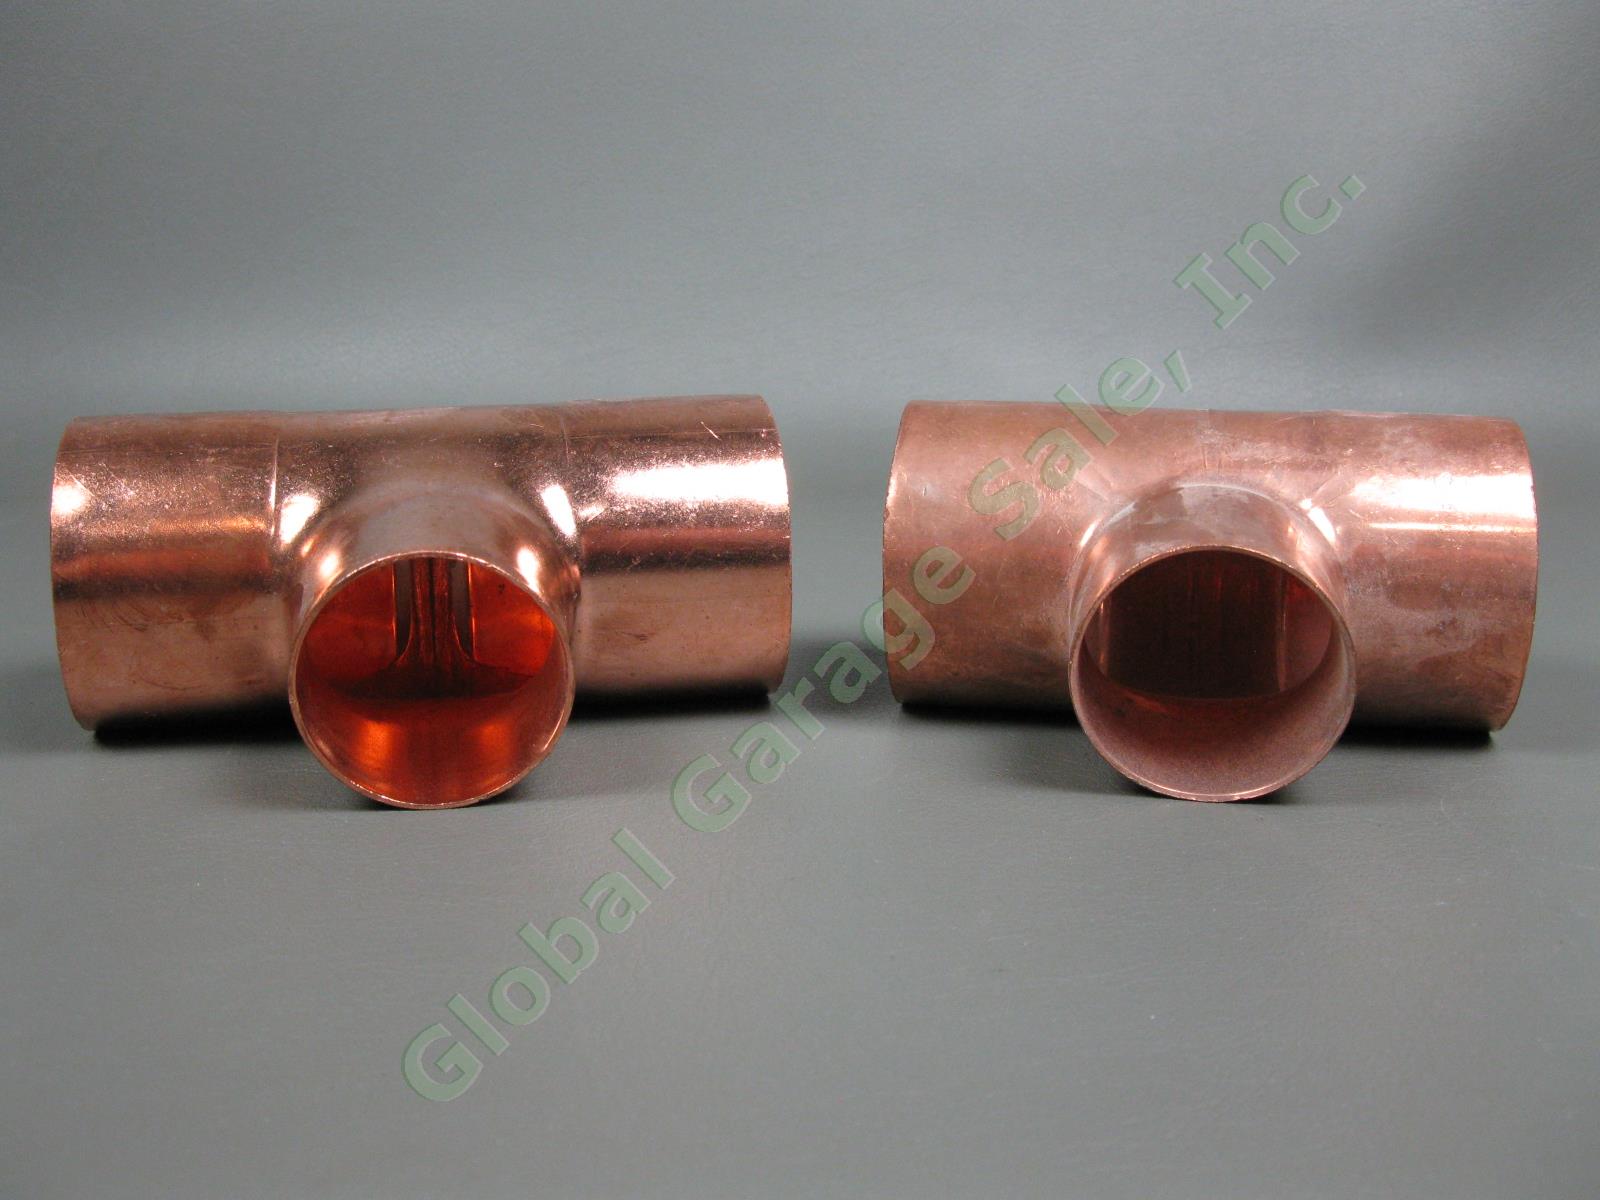 2 NEW Nibco 2" x 2" x 1-1/2" Copper EPC Reducing Sweat Tees Pipe Fittings Pair 4